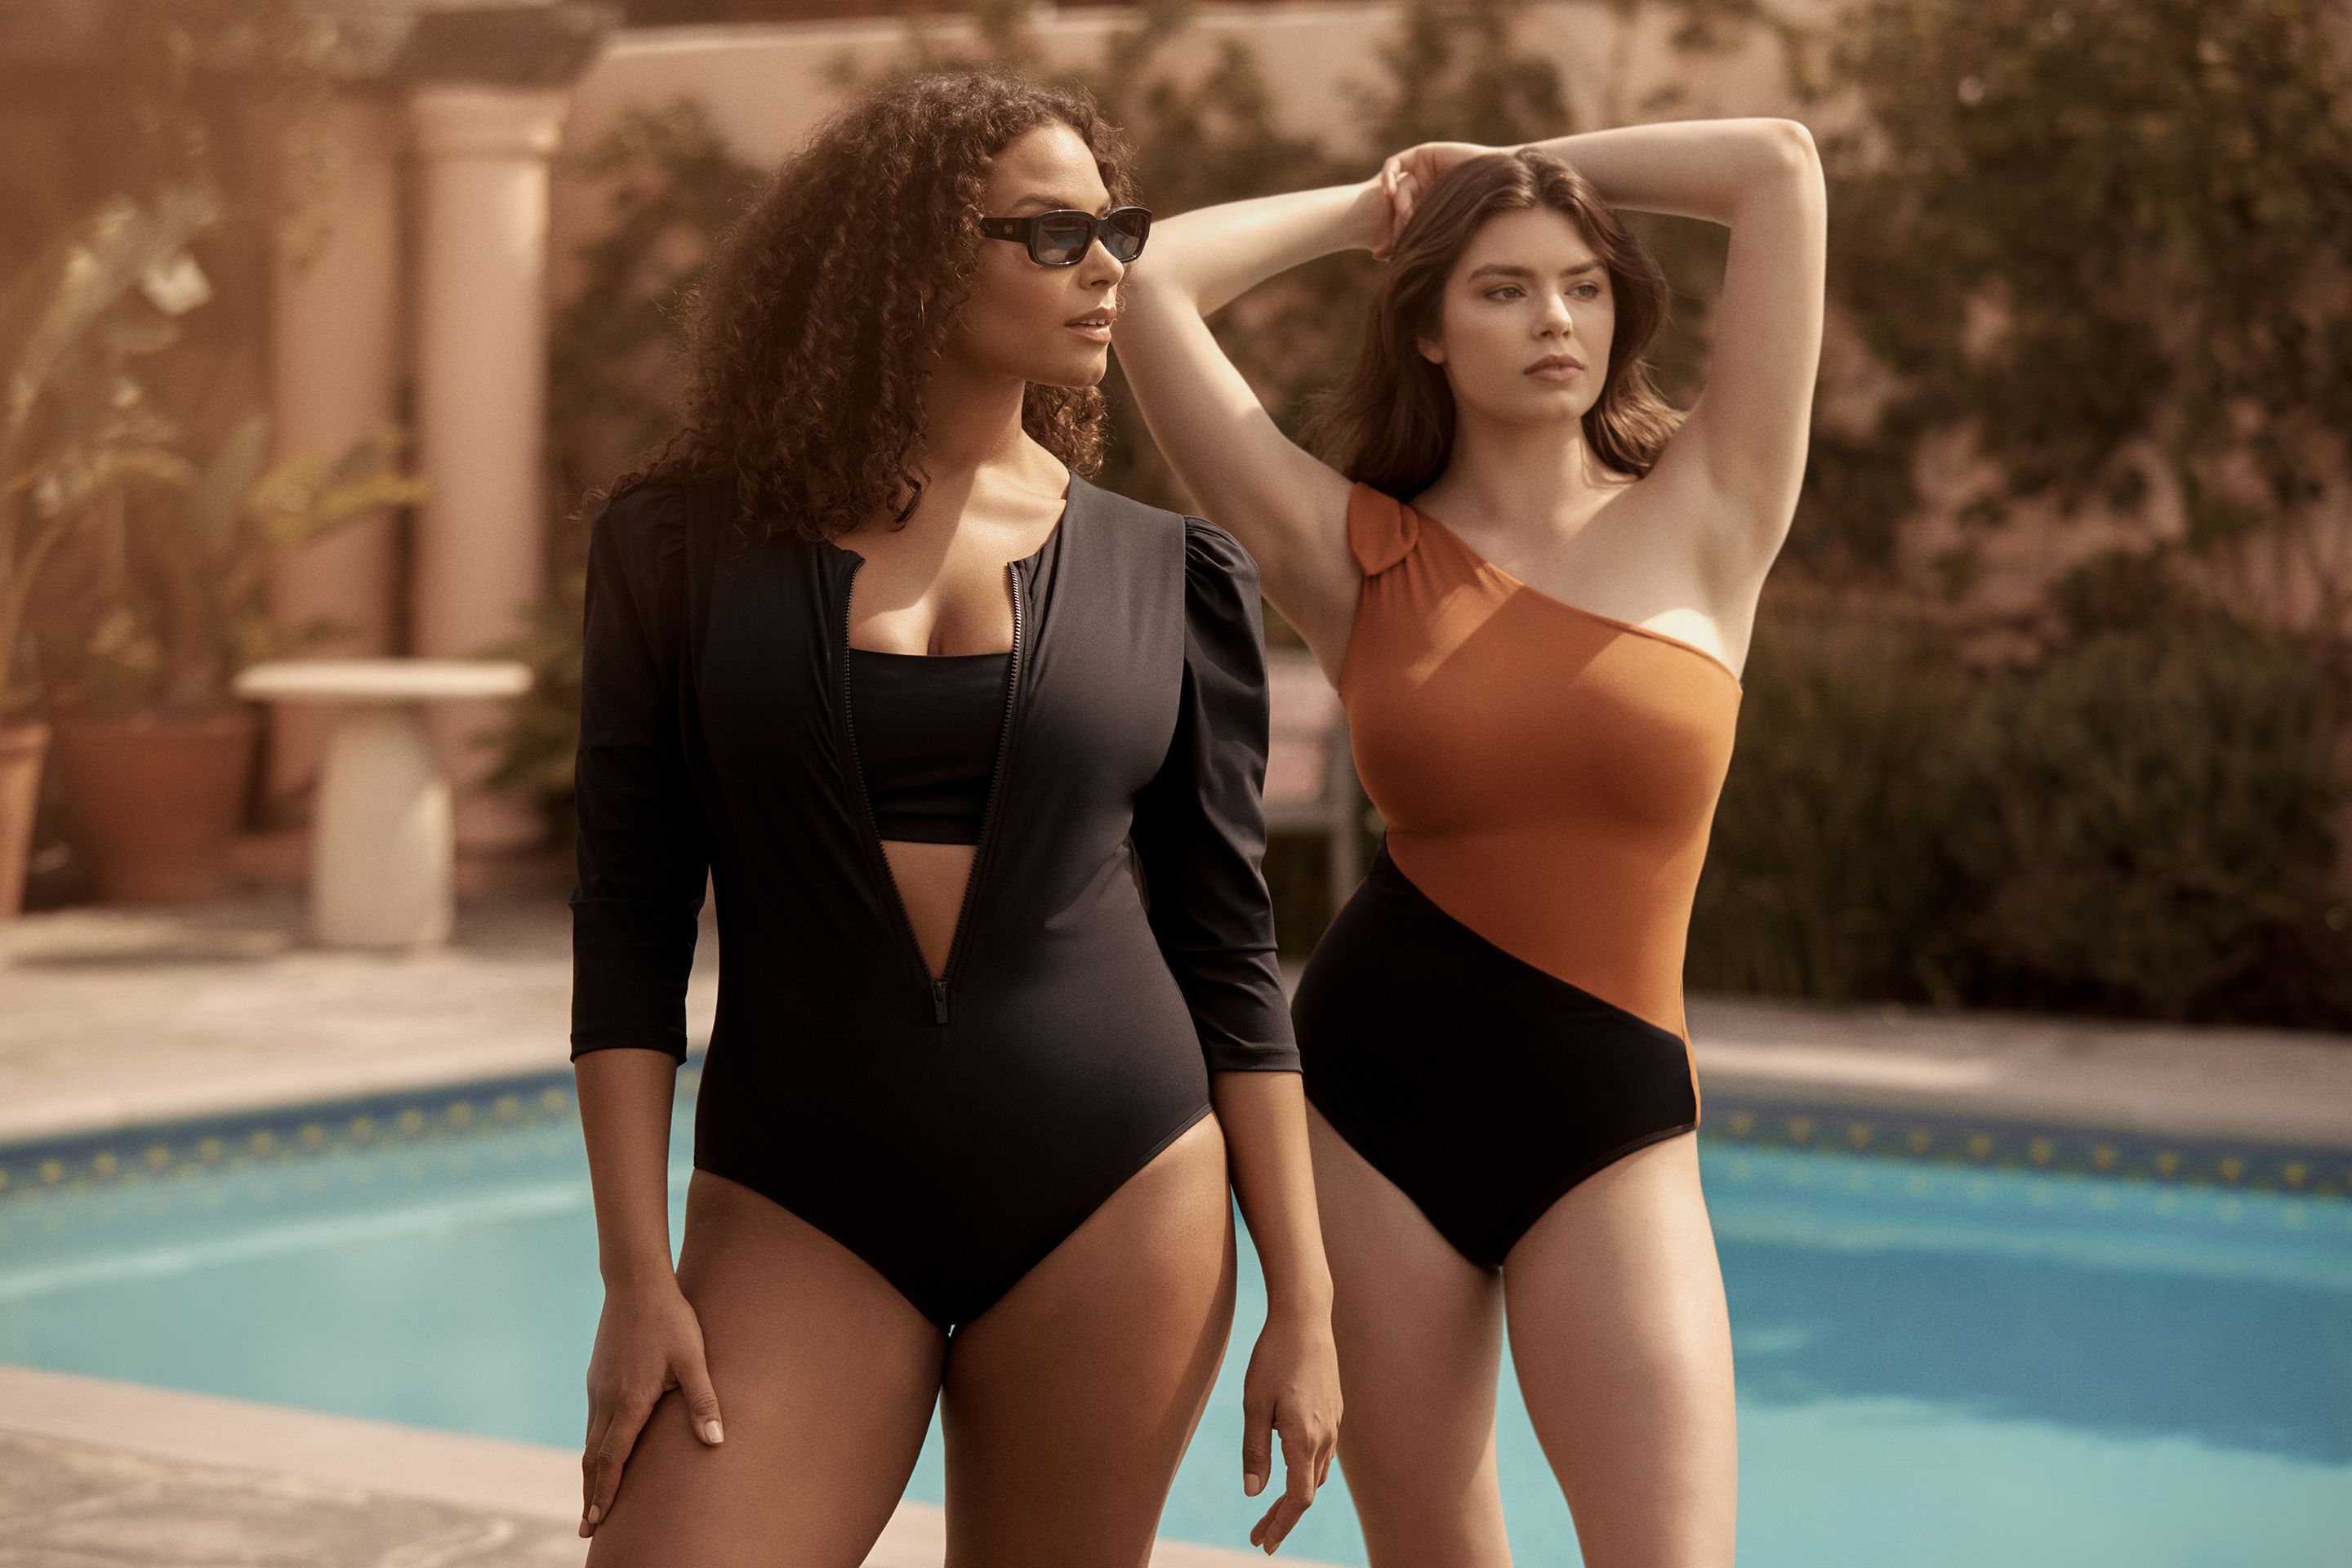 Why Bodysuits Are Popular And Several Ways To Wear Them - The Dark